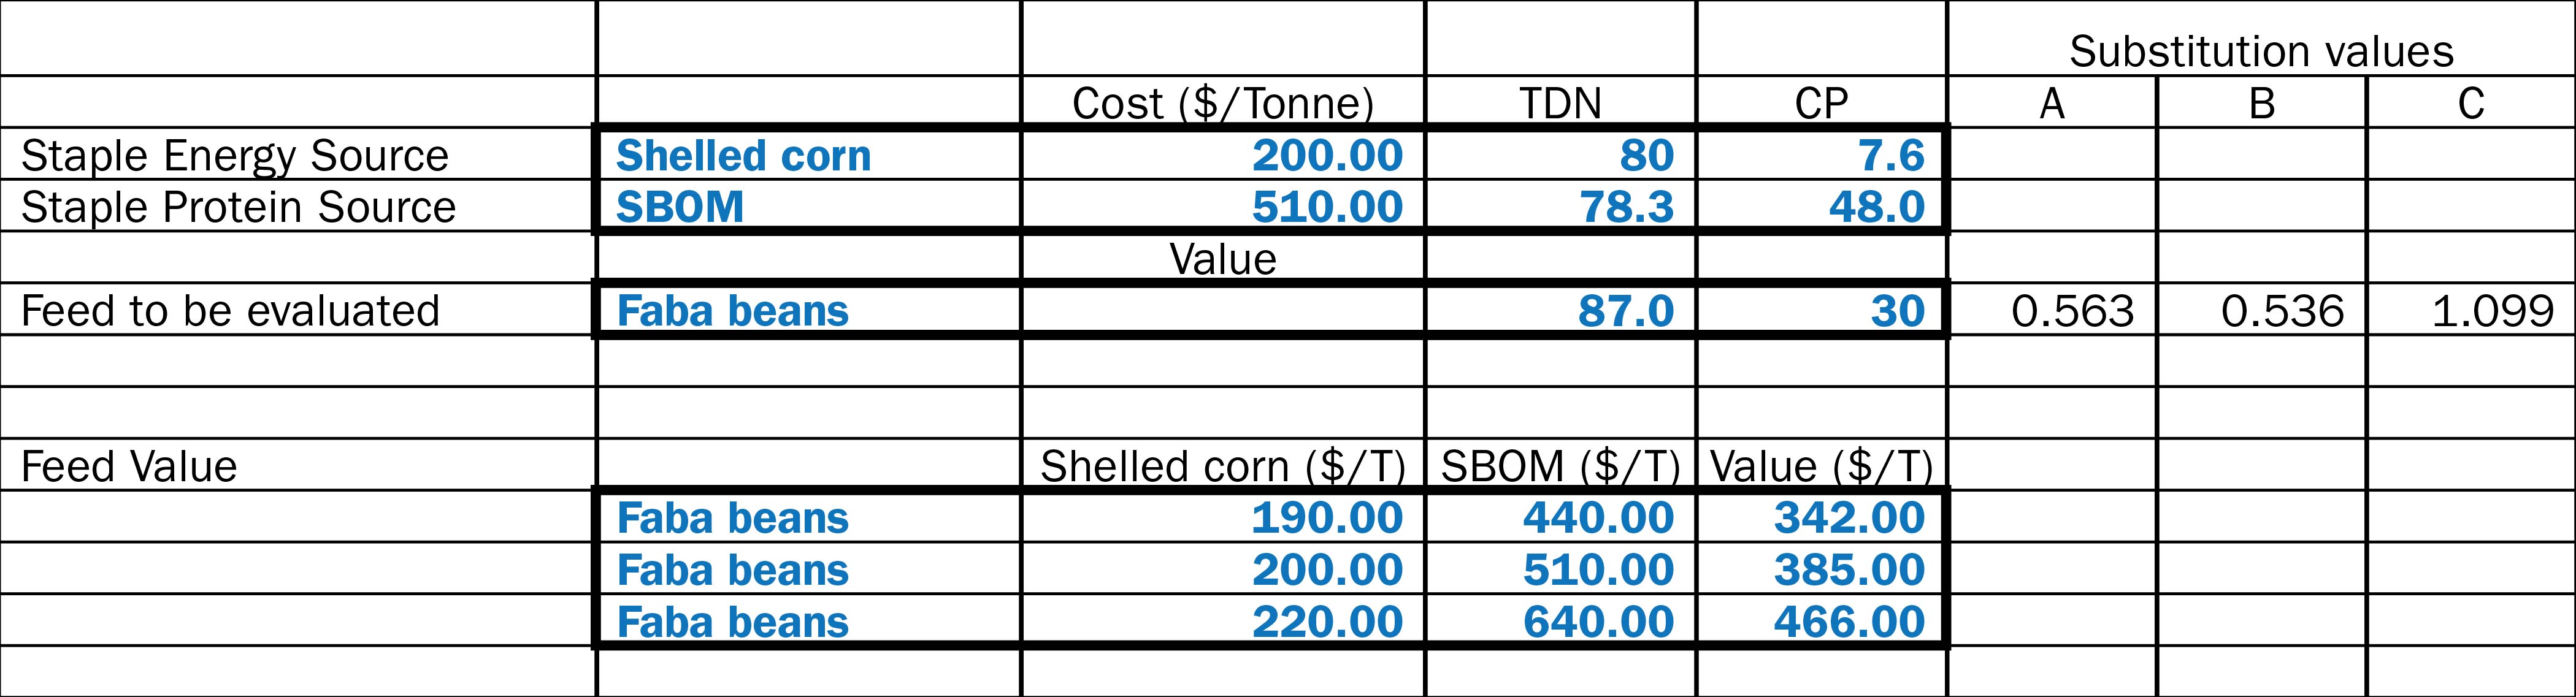 Screen capture showing the comparative feed value for faba beans using Petersen's equation.